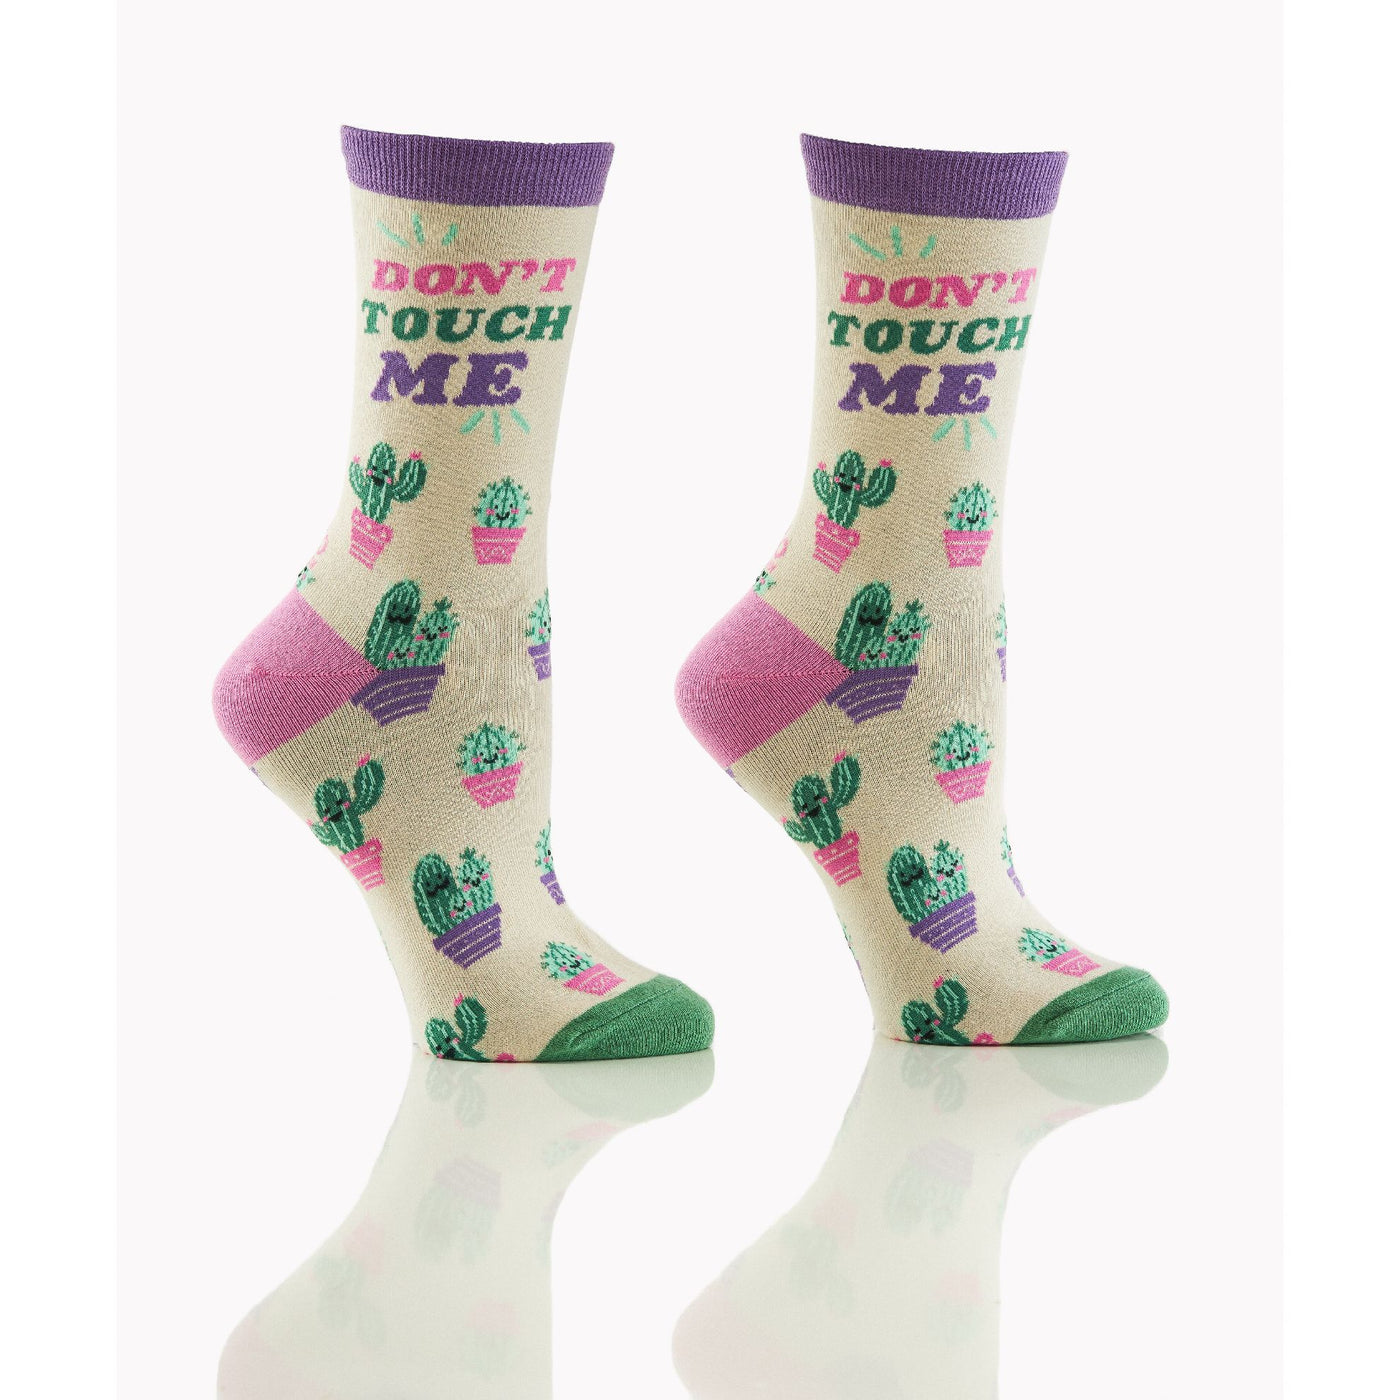 Women's Crew Sock, Don't Touch Me